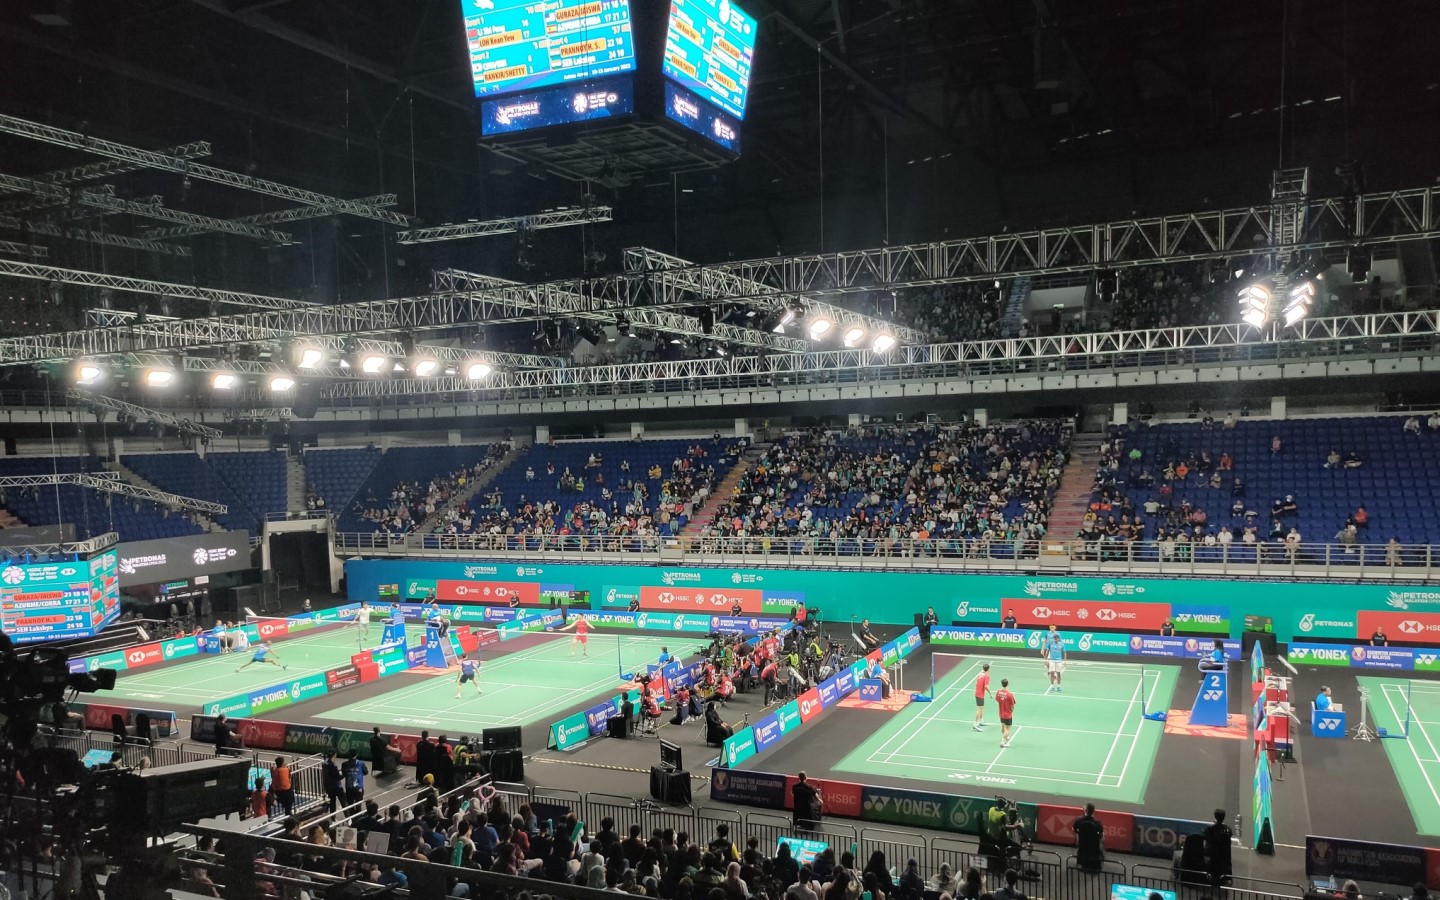 Overview on live sports badminton from media area. 1